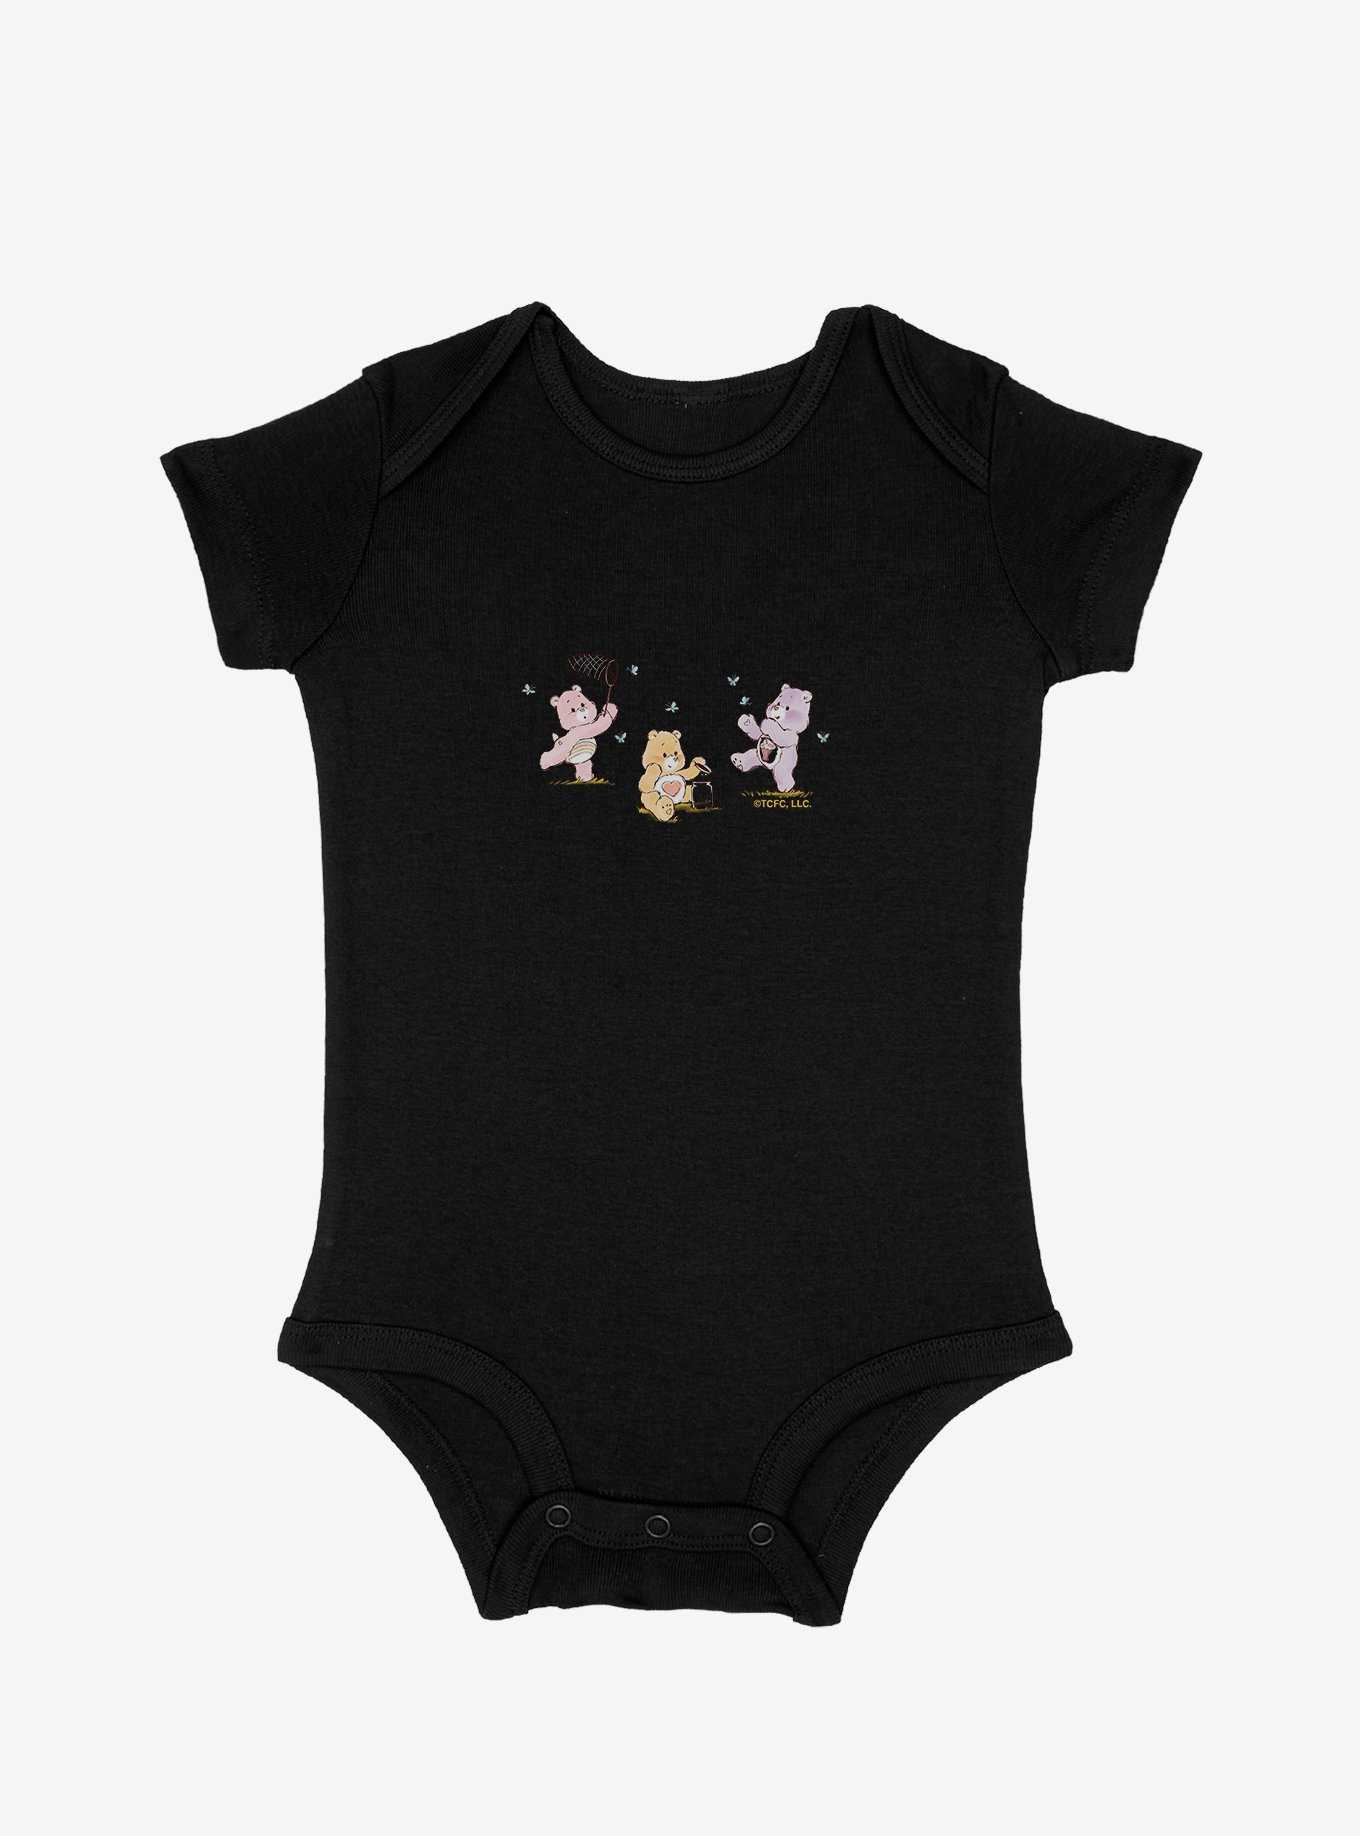 Care Bears Cheer Tenderheart And Share Catching Fireflies Infant Bodysuit, , hi-res